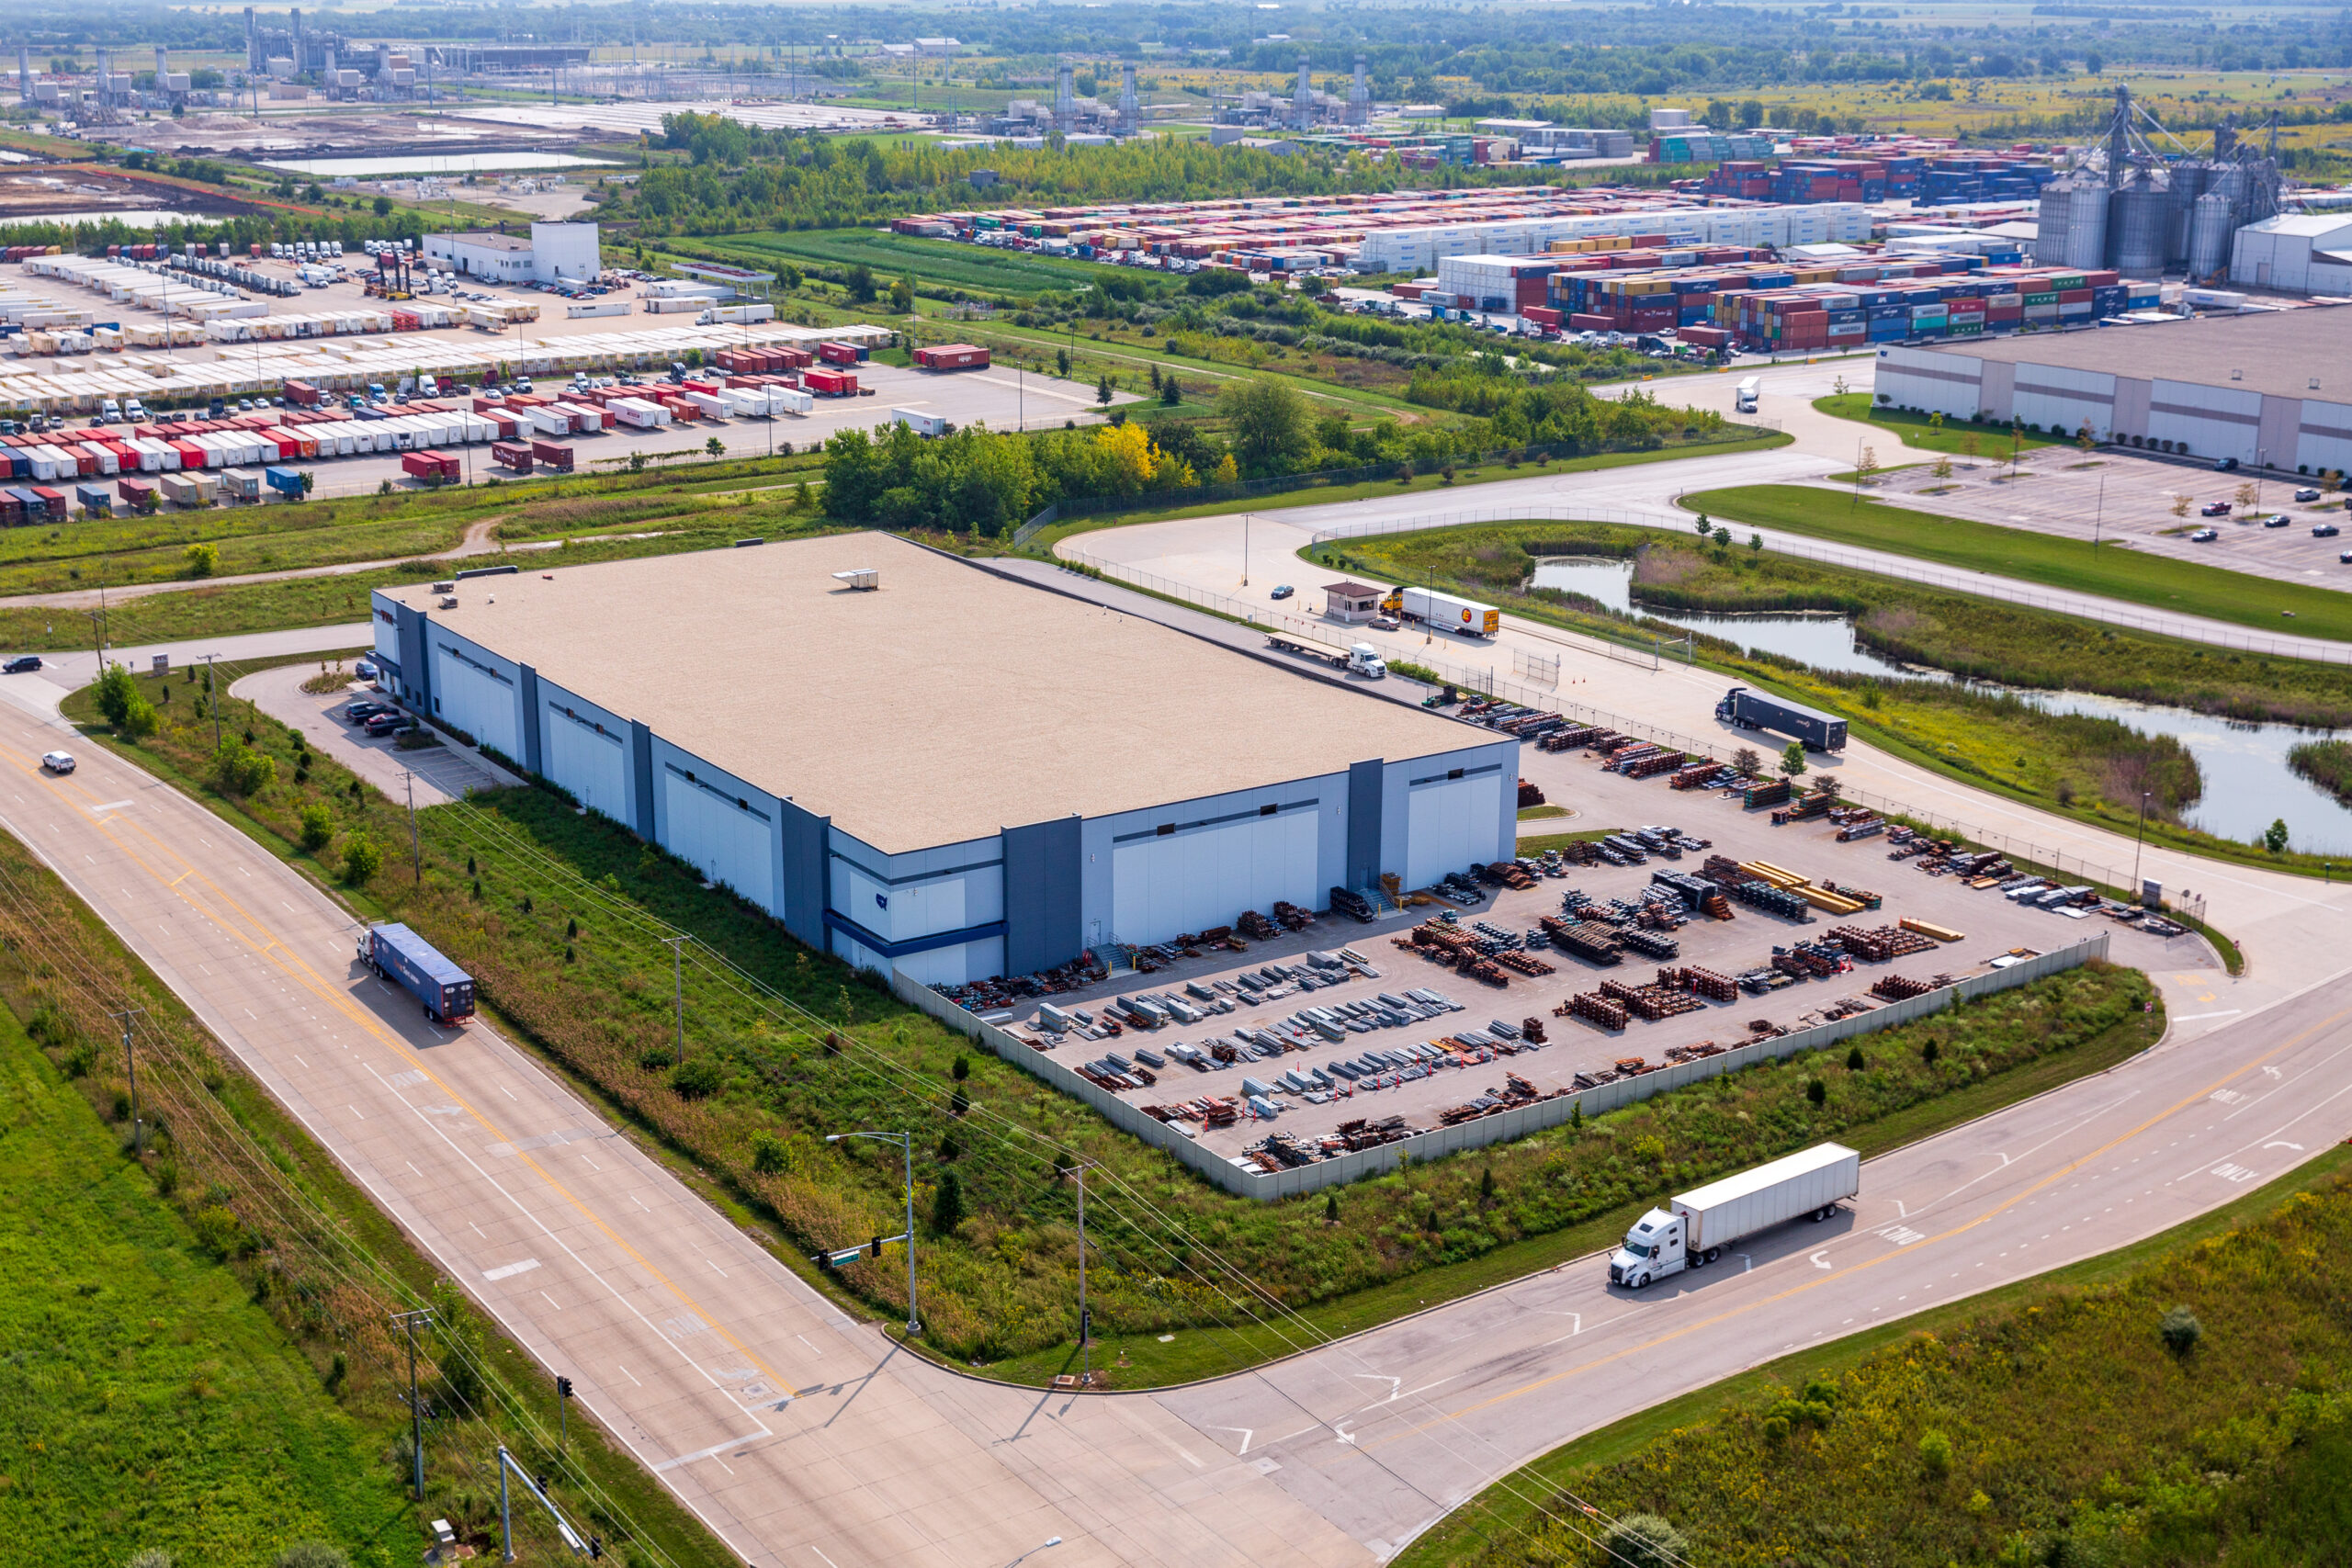 Aerial Photo Of Warehouse With Streets Surrounding the Facility With Trucks